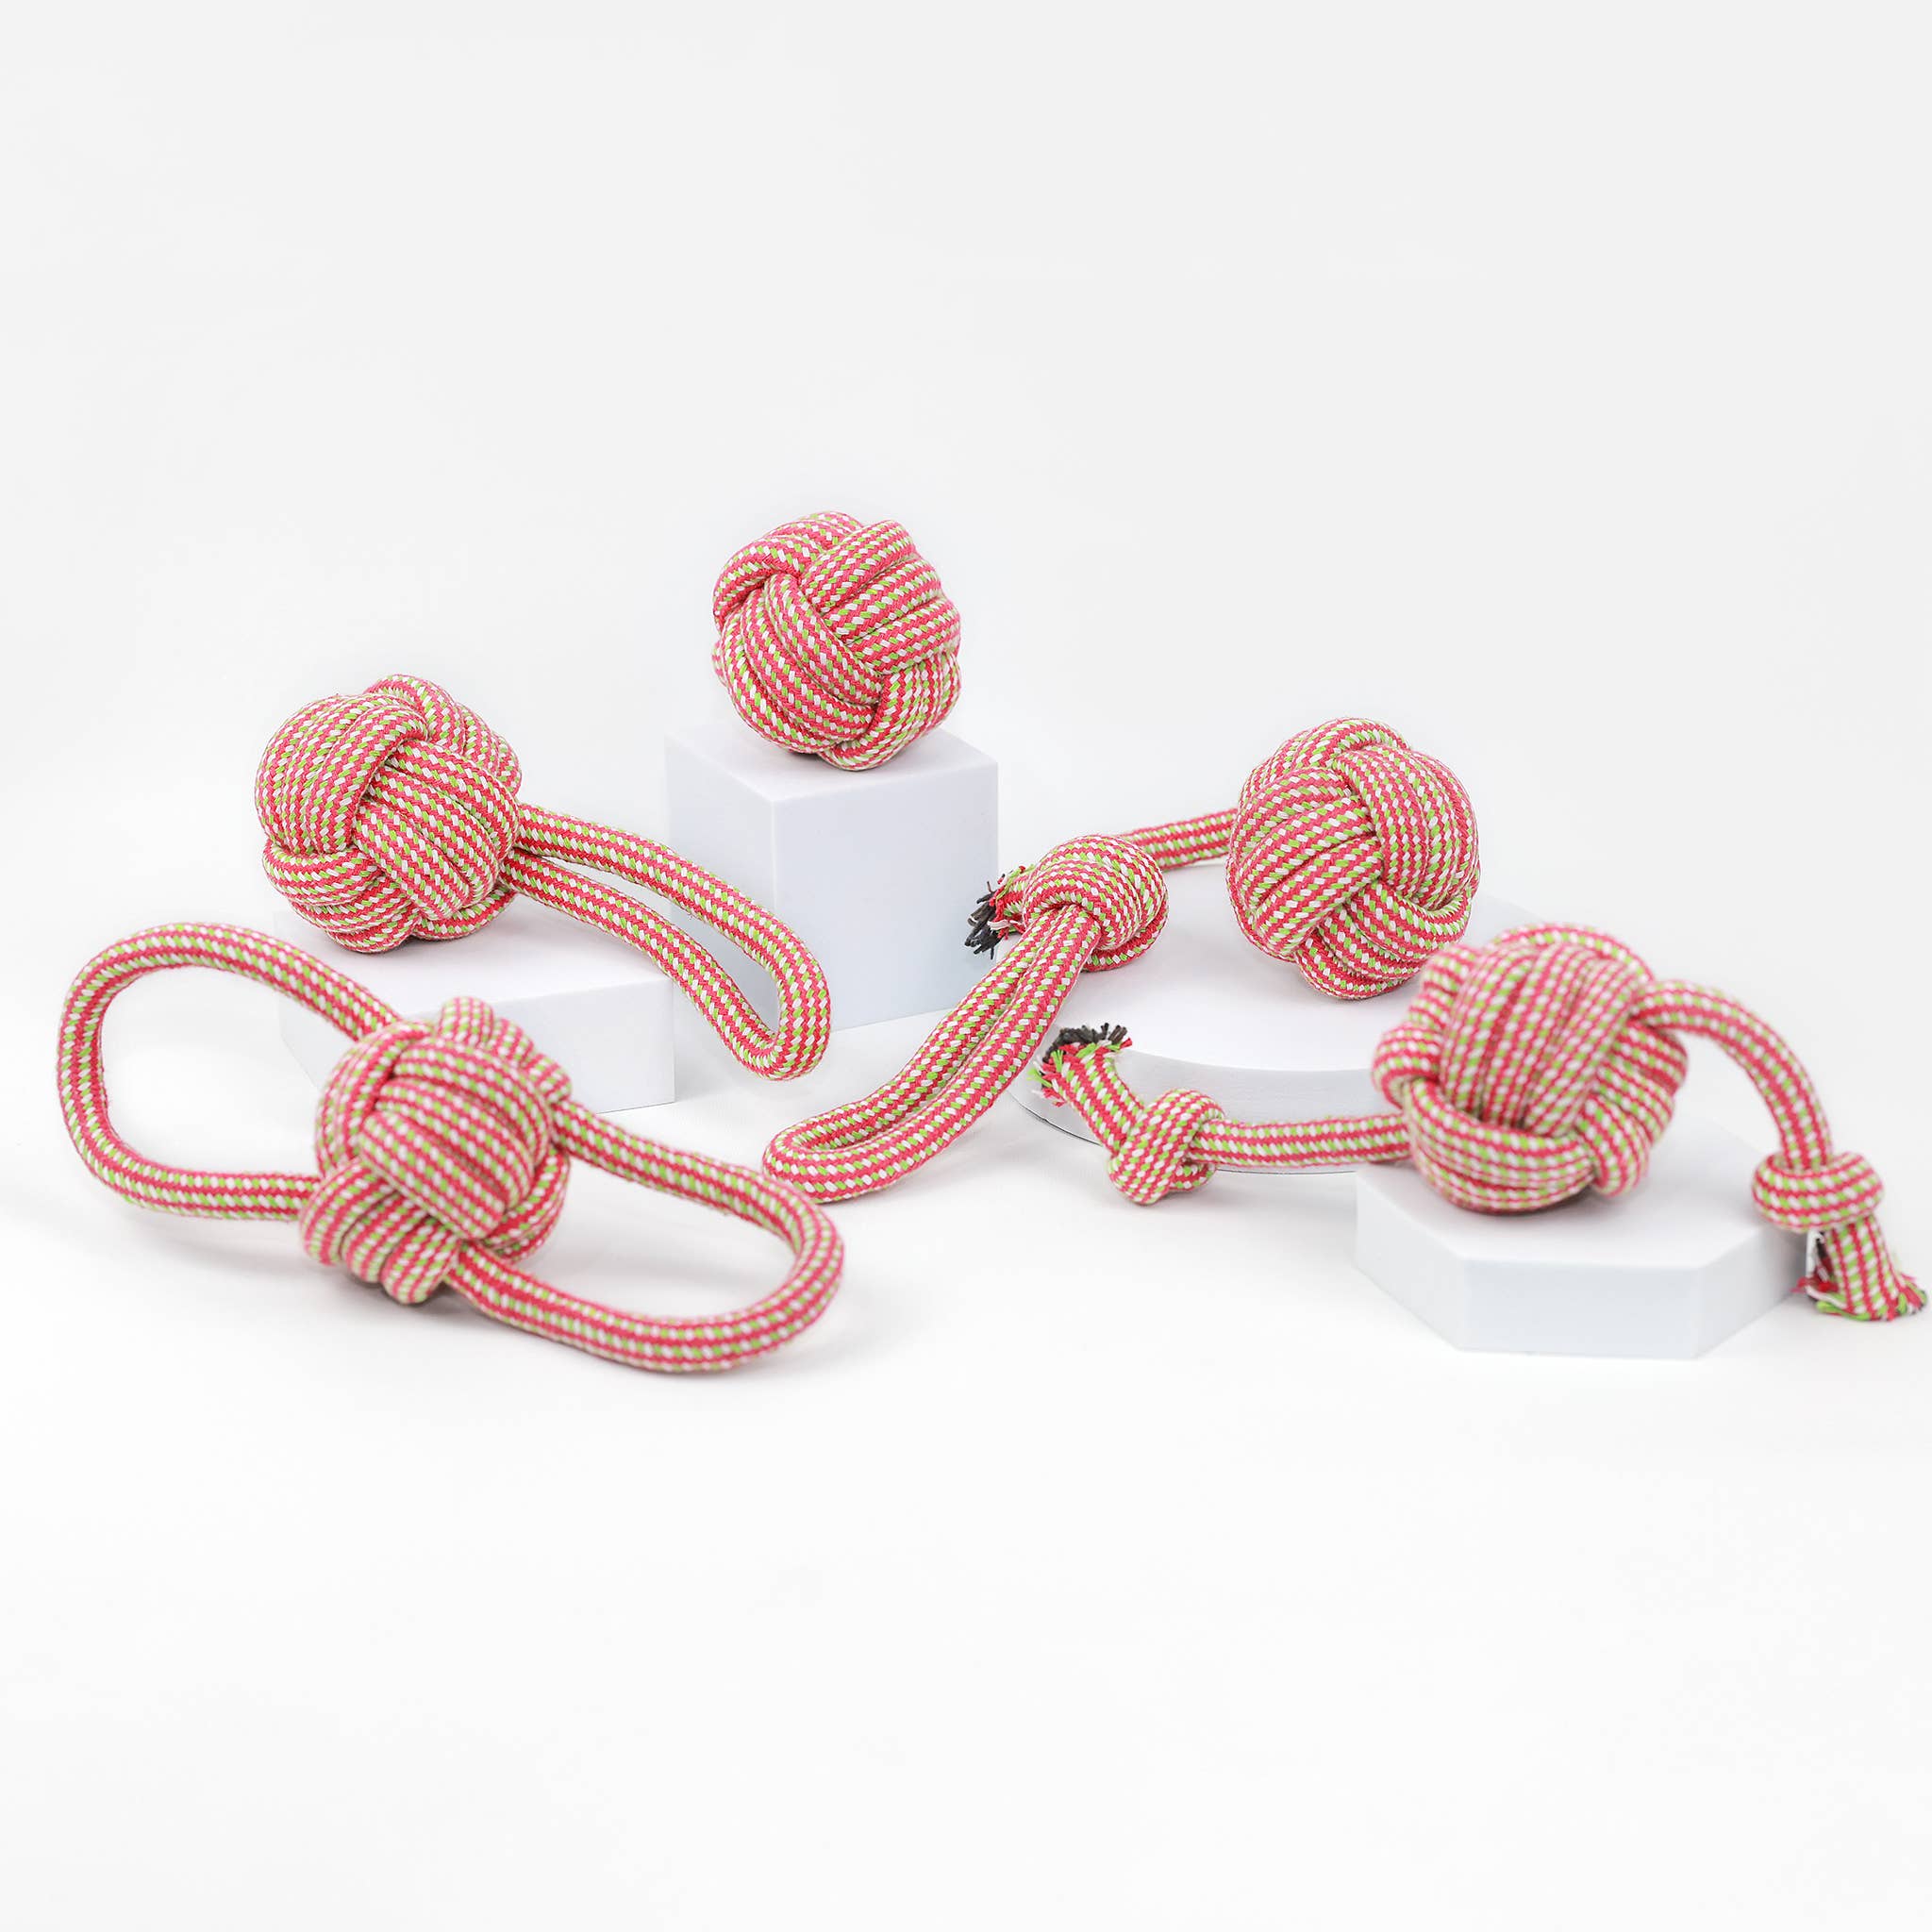 Pink and Green Tug Rope Toys | Handmade| Two Handles